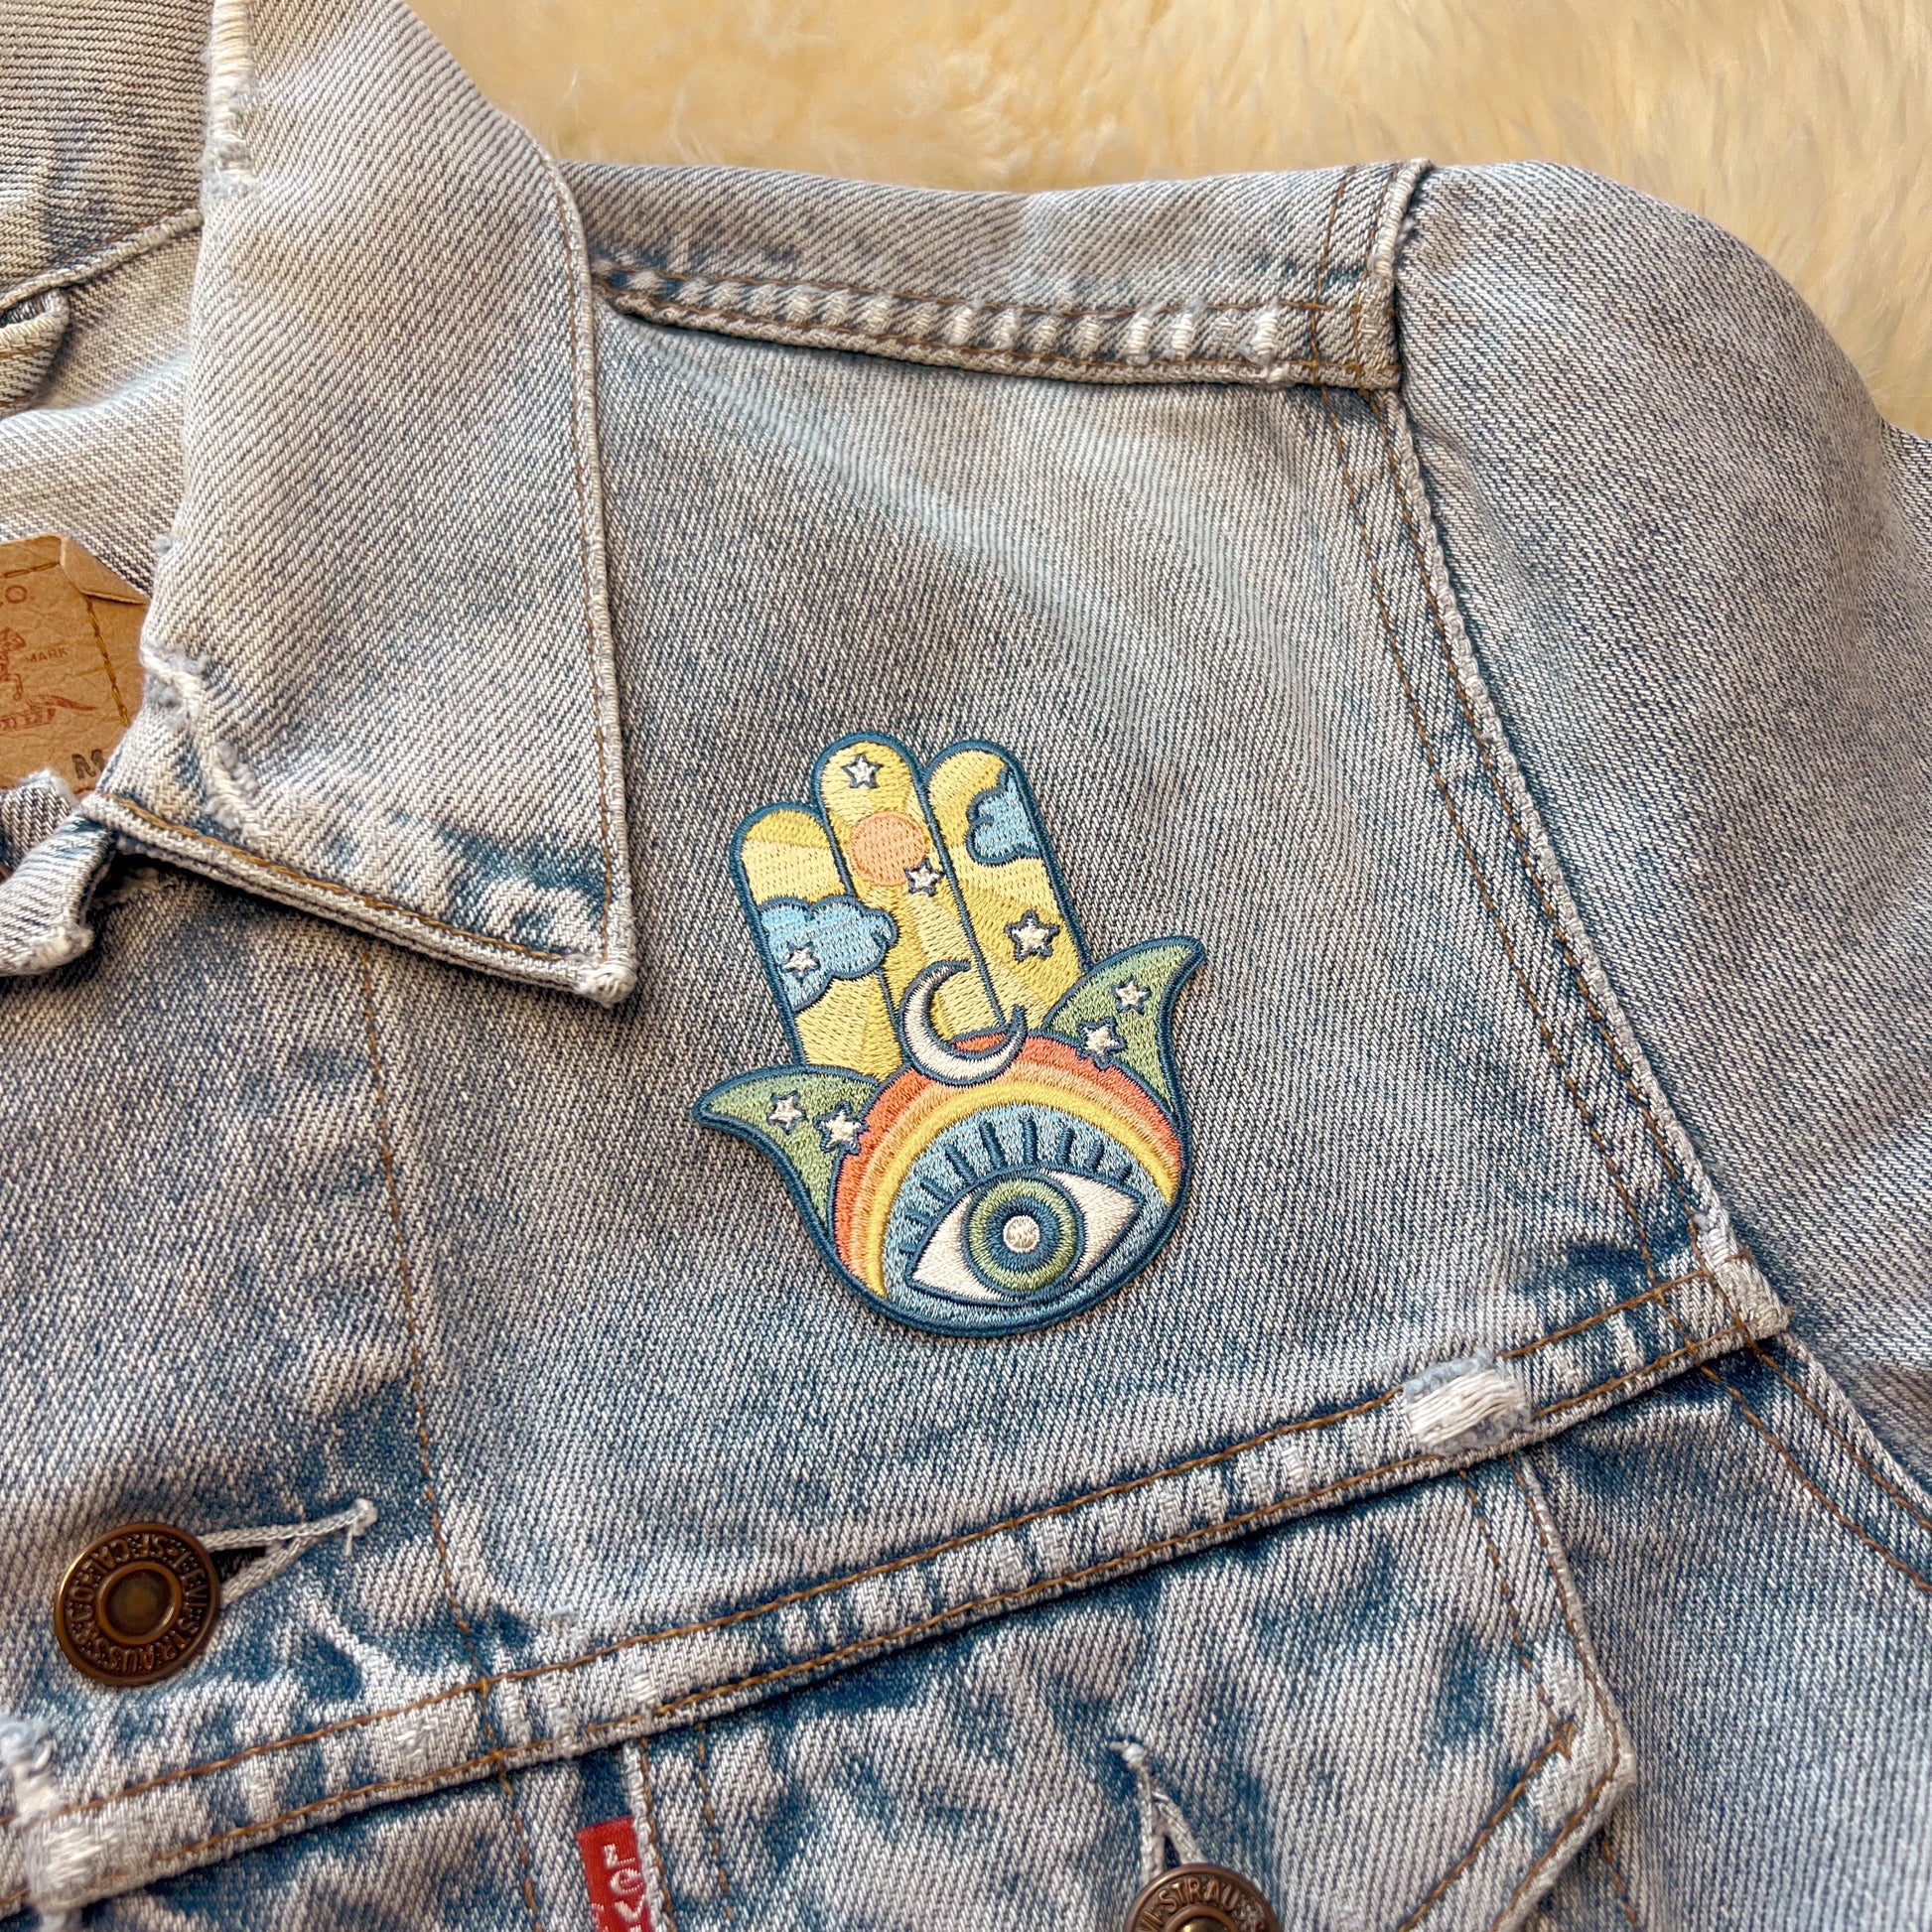 jeans, patches, custom patches, embroidered patches, iron on